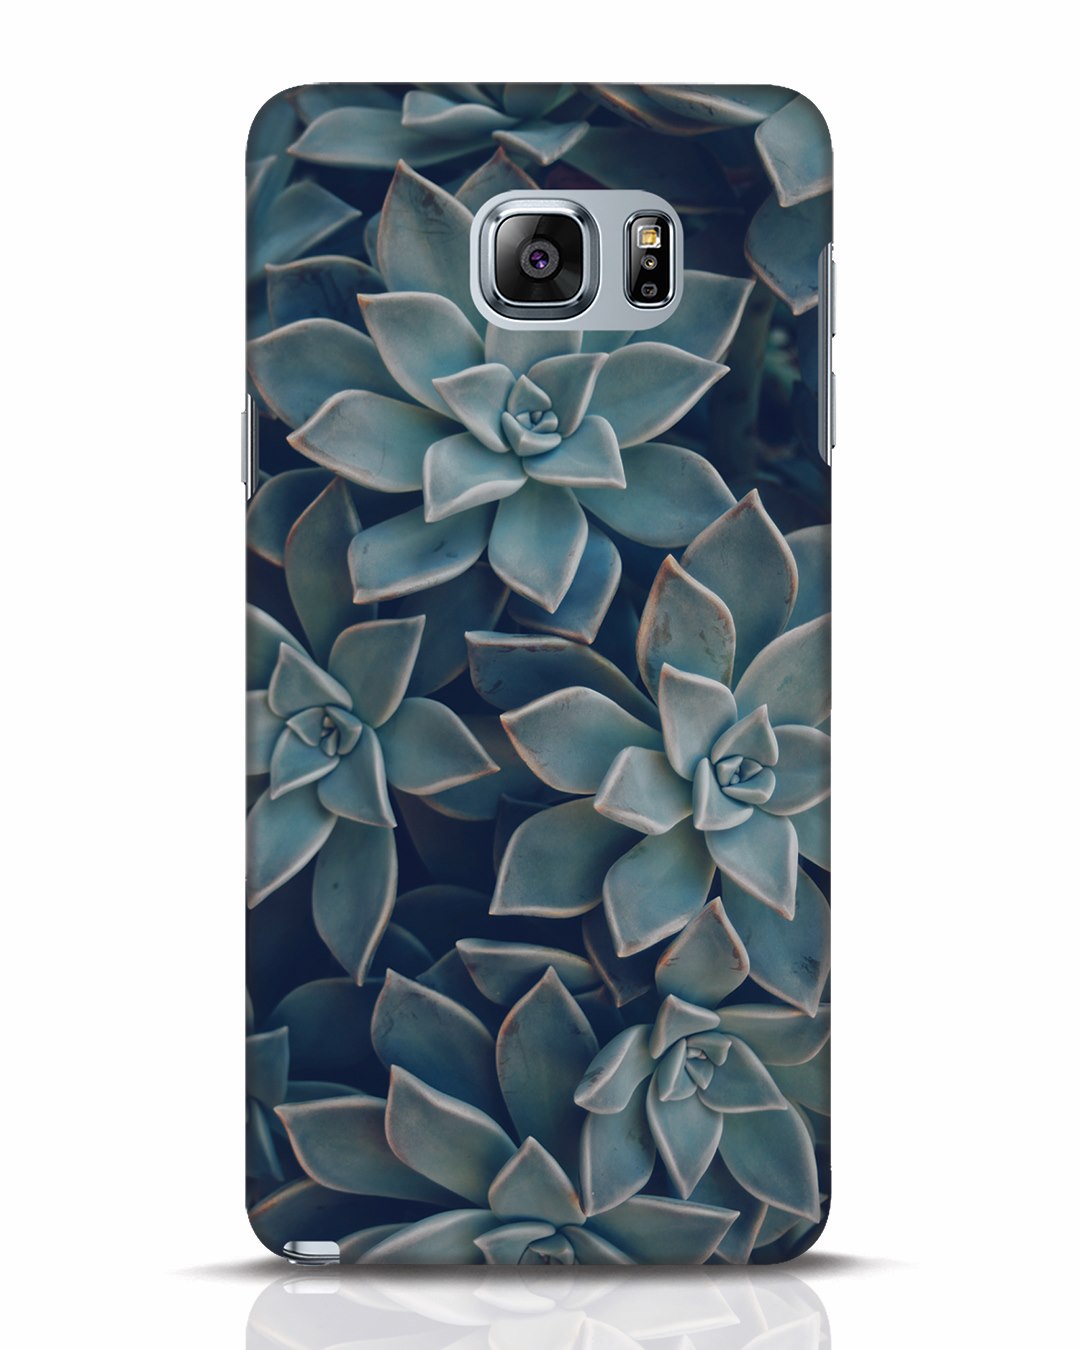 Succulent Samsung Galaxy Note 5 Mobile Cover Samsung Galaxy Note 5 Mobile Covers Bewakoof.com